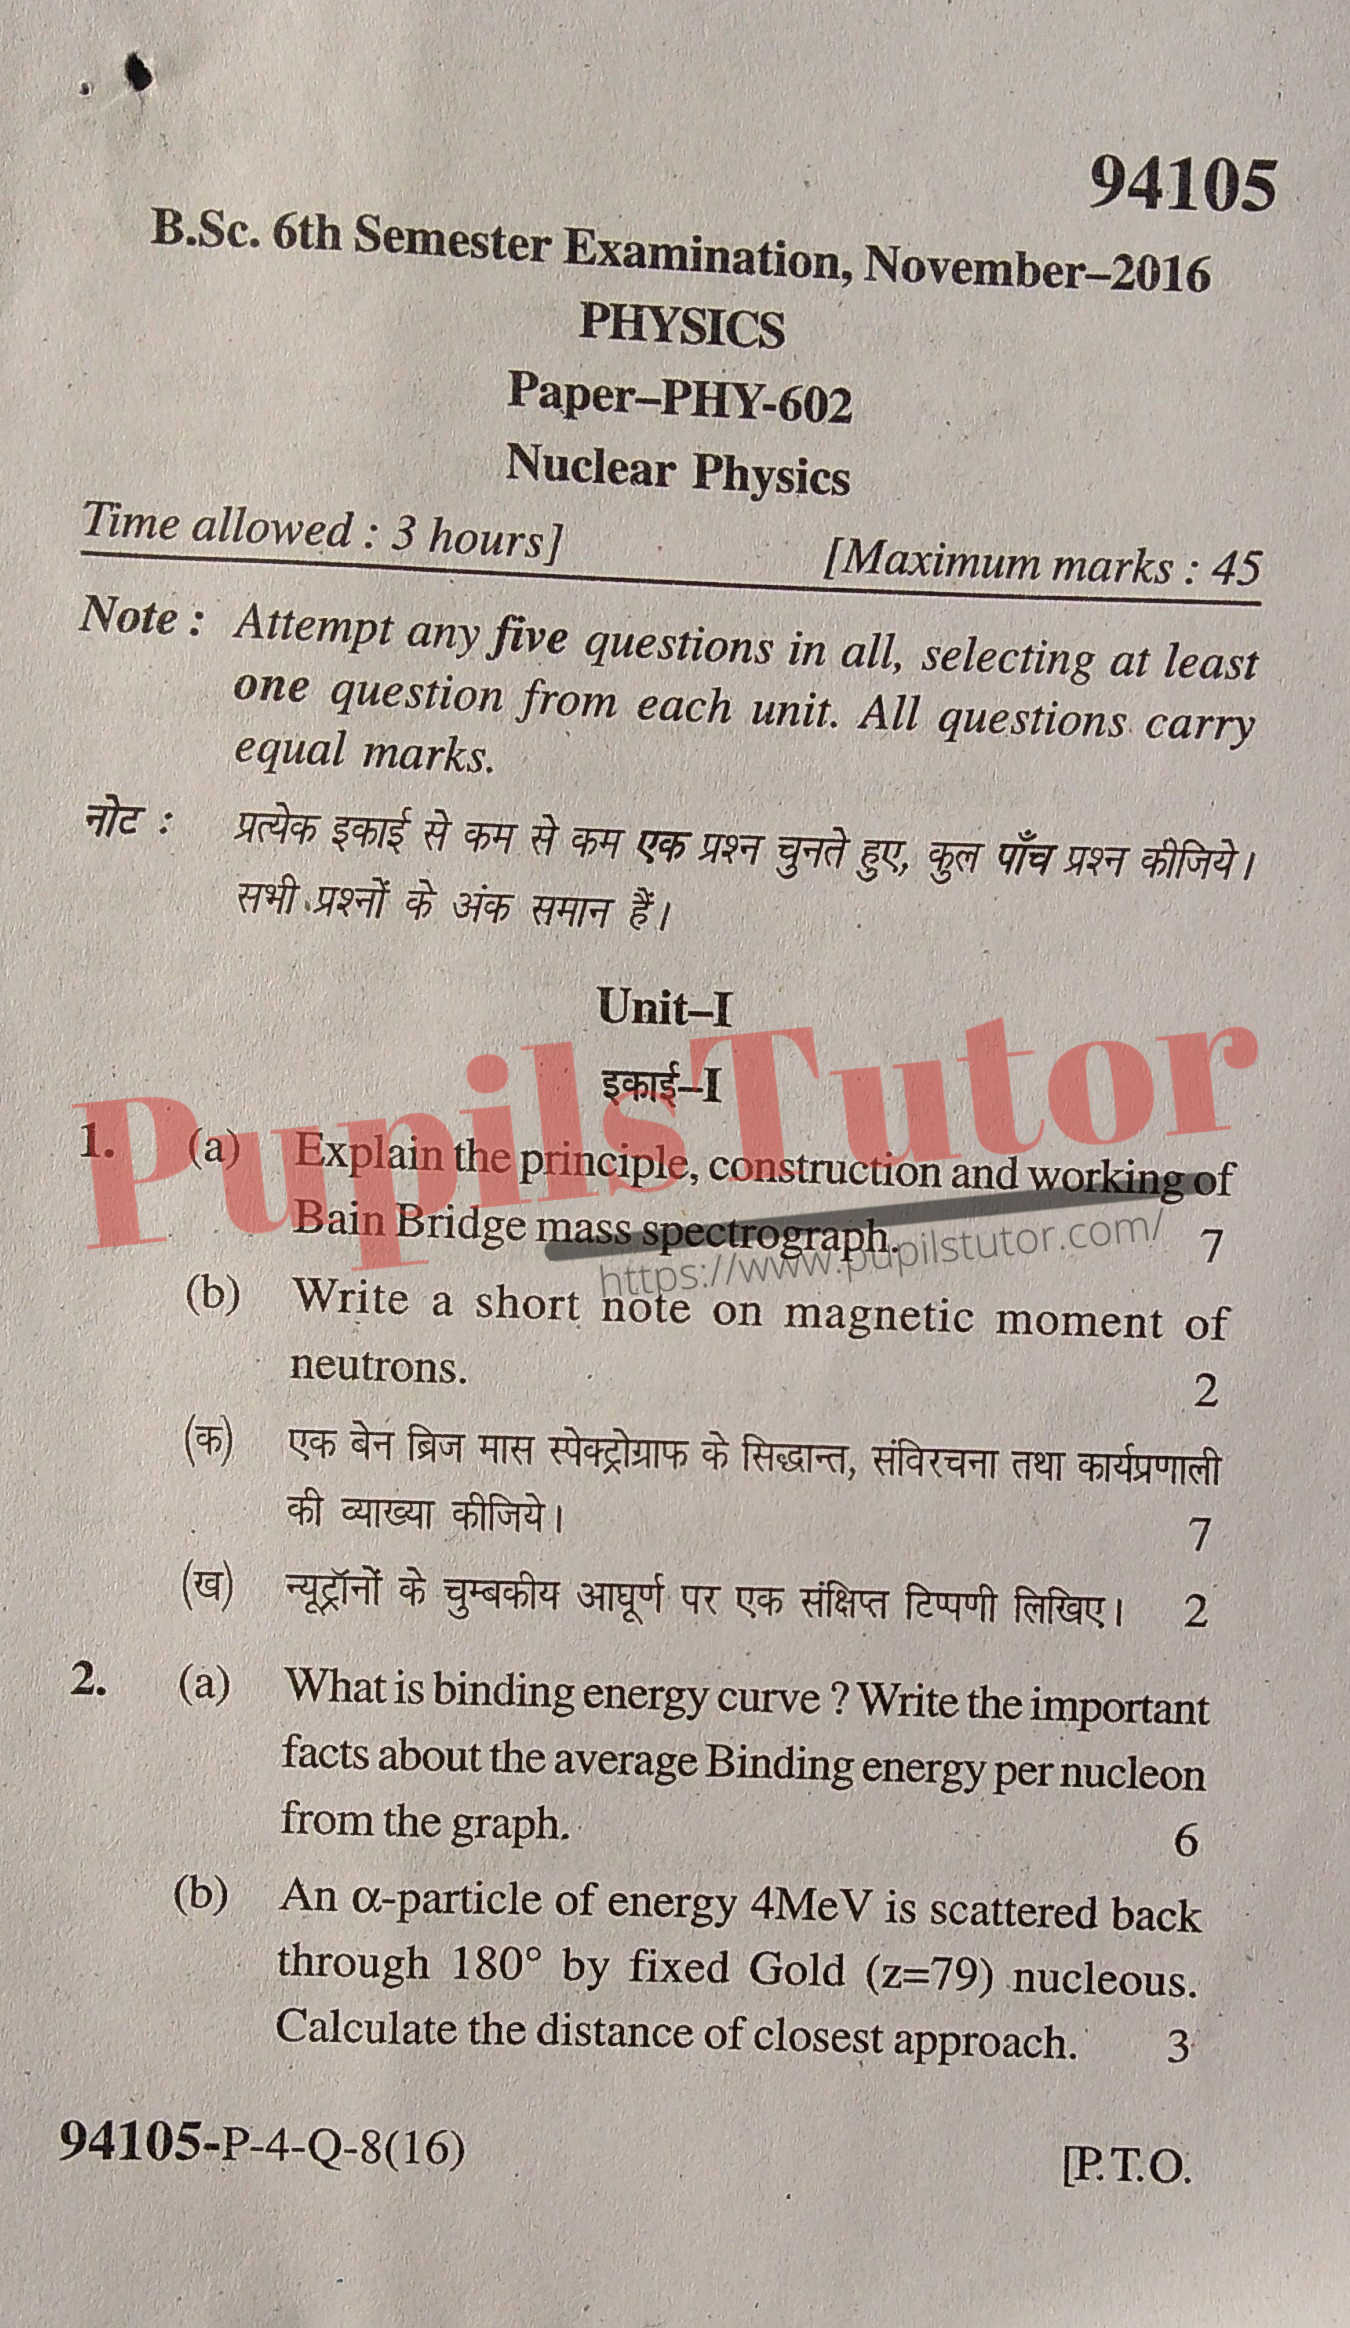 MDU (Maharshi Dayanand University, Rohtak Haryana) BSc Physics Regular Exam Sixth Semester Previous Year Nuclear Physics Question Paper For November, 2016 Exam (Question Paper Page 1) - pupilstutor.com